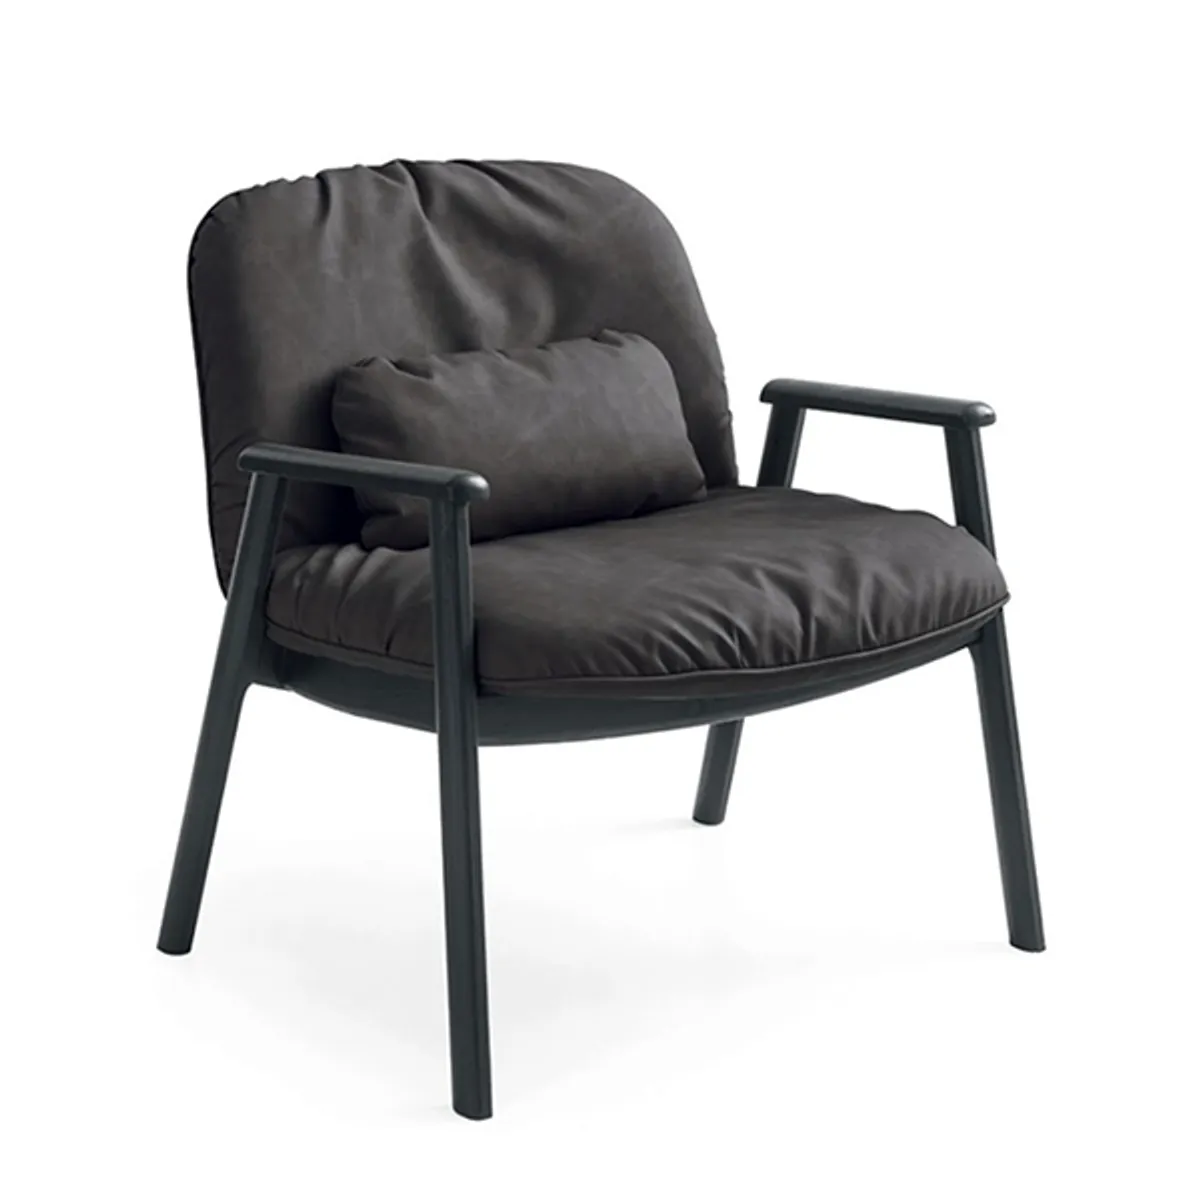 Baltimora Armchair Inside Out Contracts2